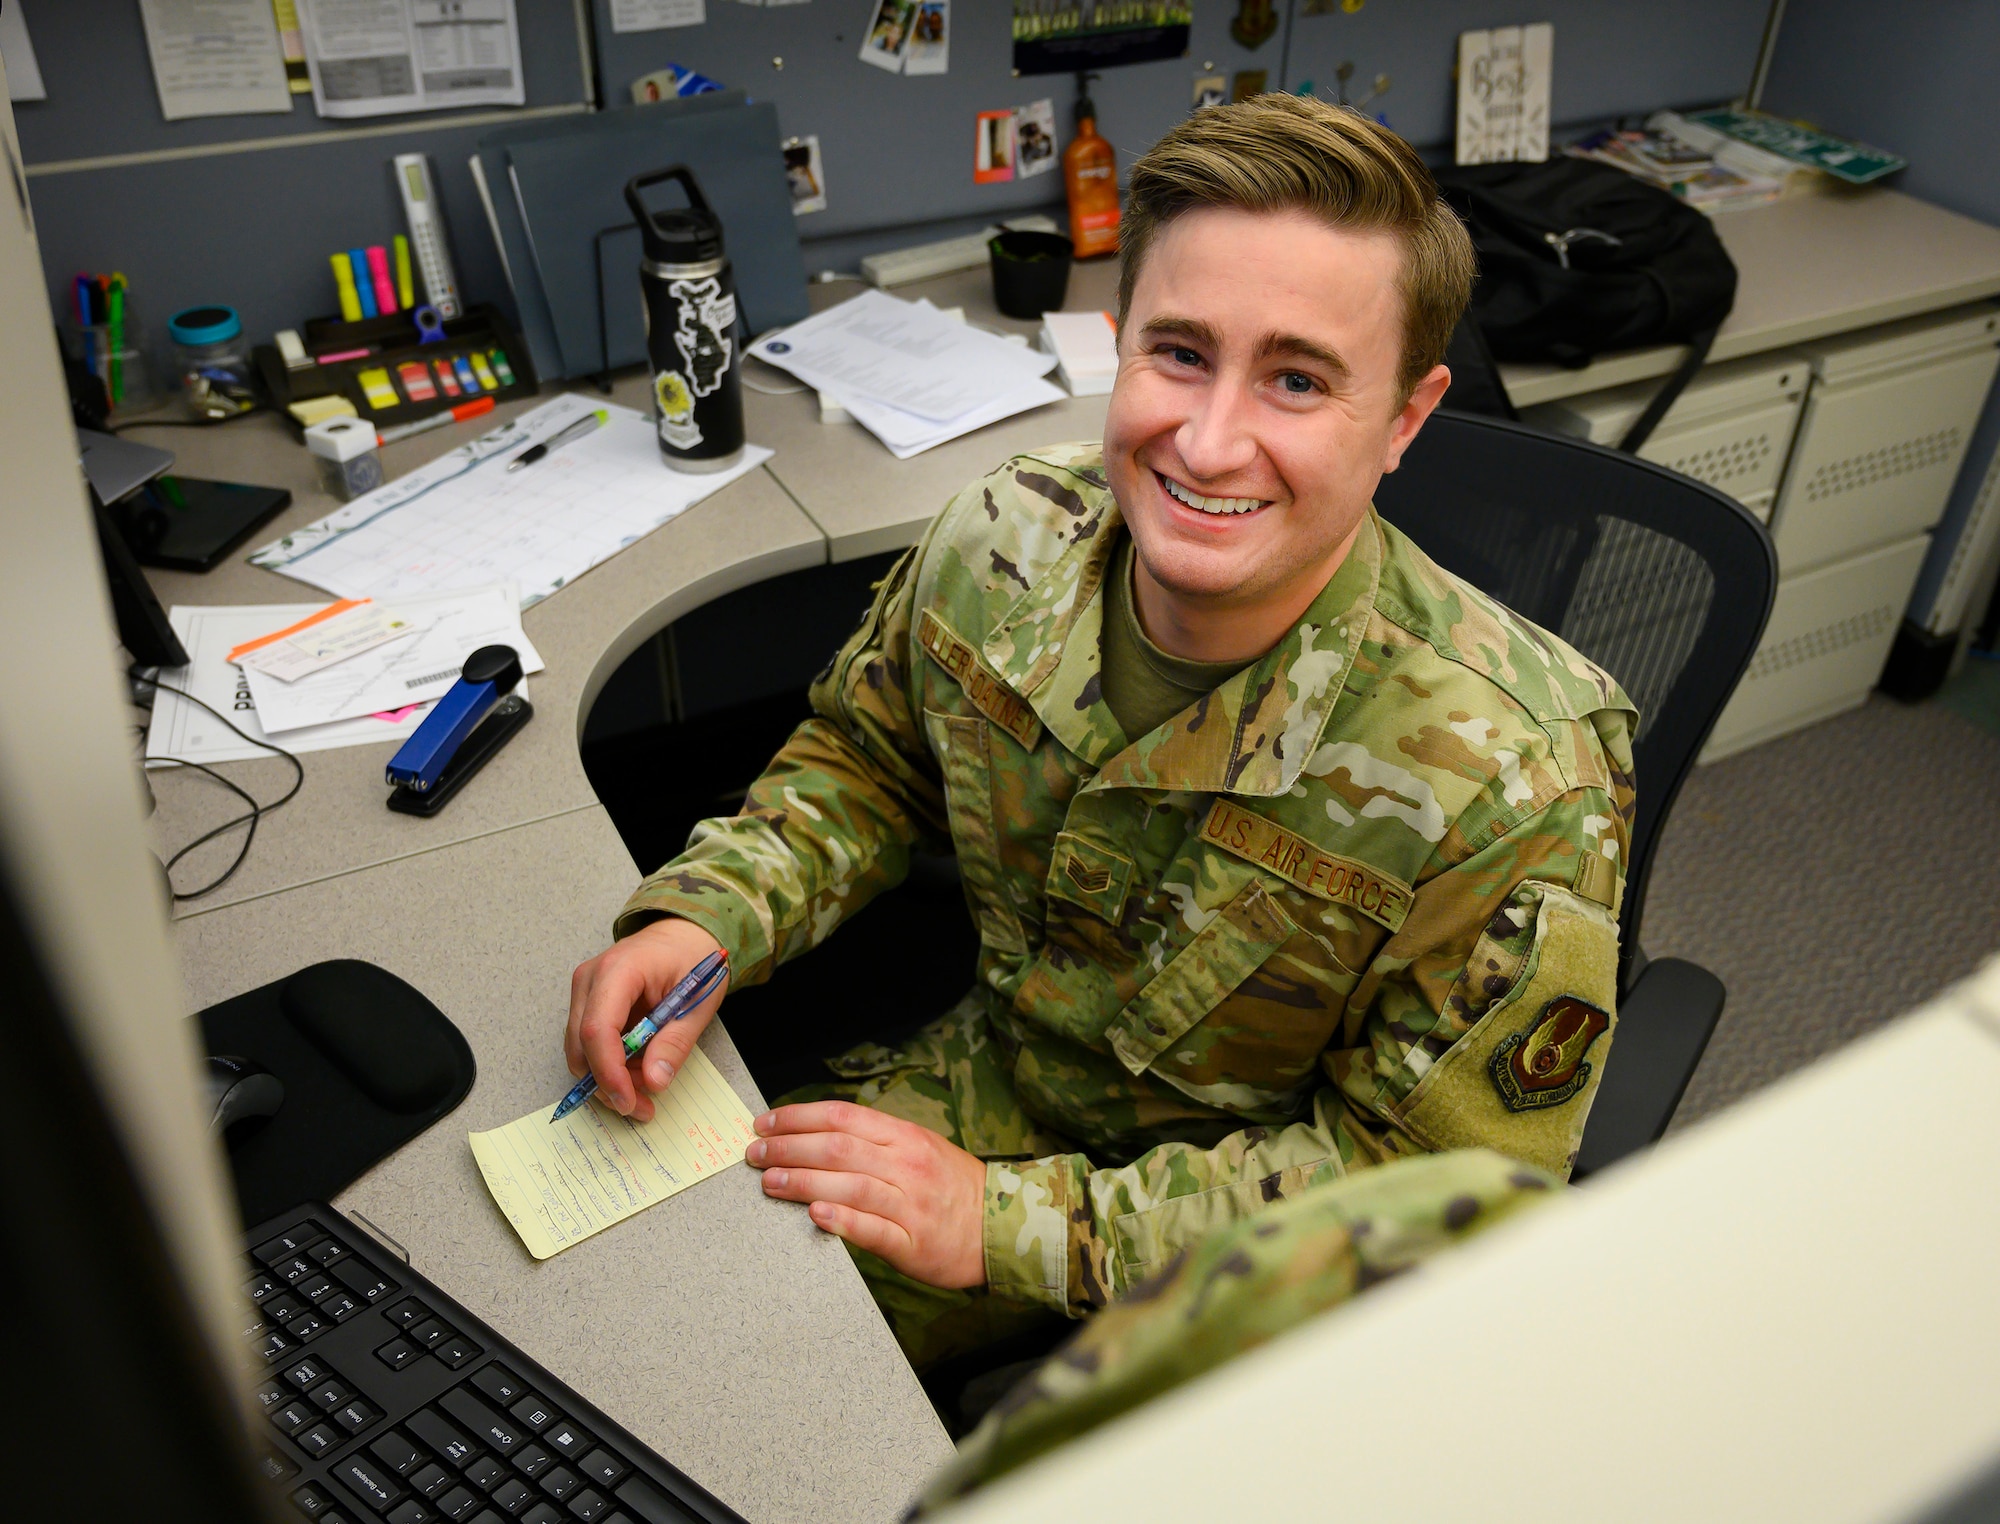 Staff Sgt. Hayden Ullery-Oatney, occupational safety apprentice poses for a photo June 22, 2021, at his desk in the 88th Air Base Wing Safety Office at Wright-Patterson Air Force Base, Ohio. Ullery-Oatney, who came out as at his first Air Force assignment, said he is seeing acceptance and progress for the LGBTQ community serving in the Air Force. (U.S. Air Force photo by R.J. Oriez)